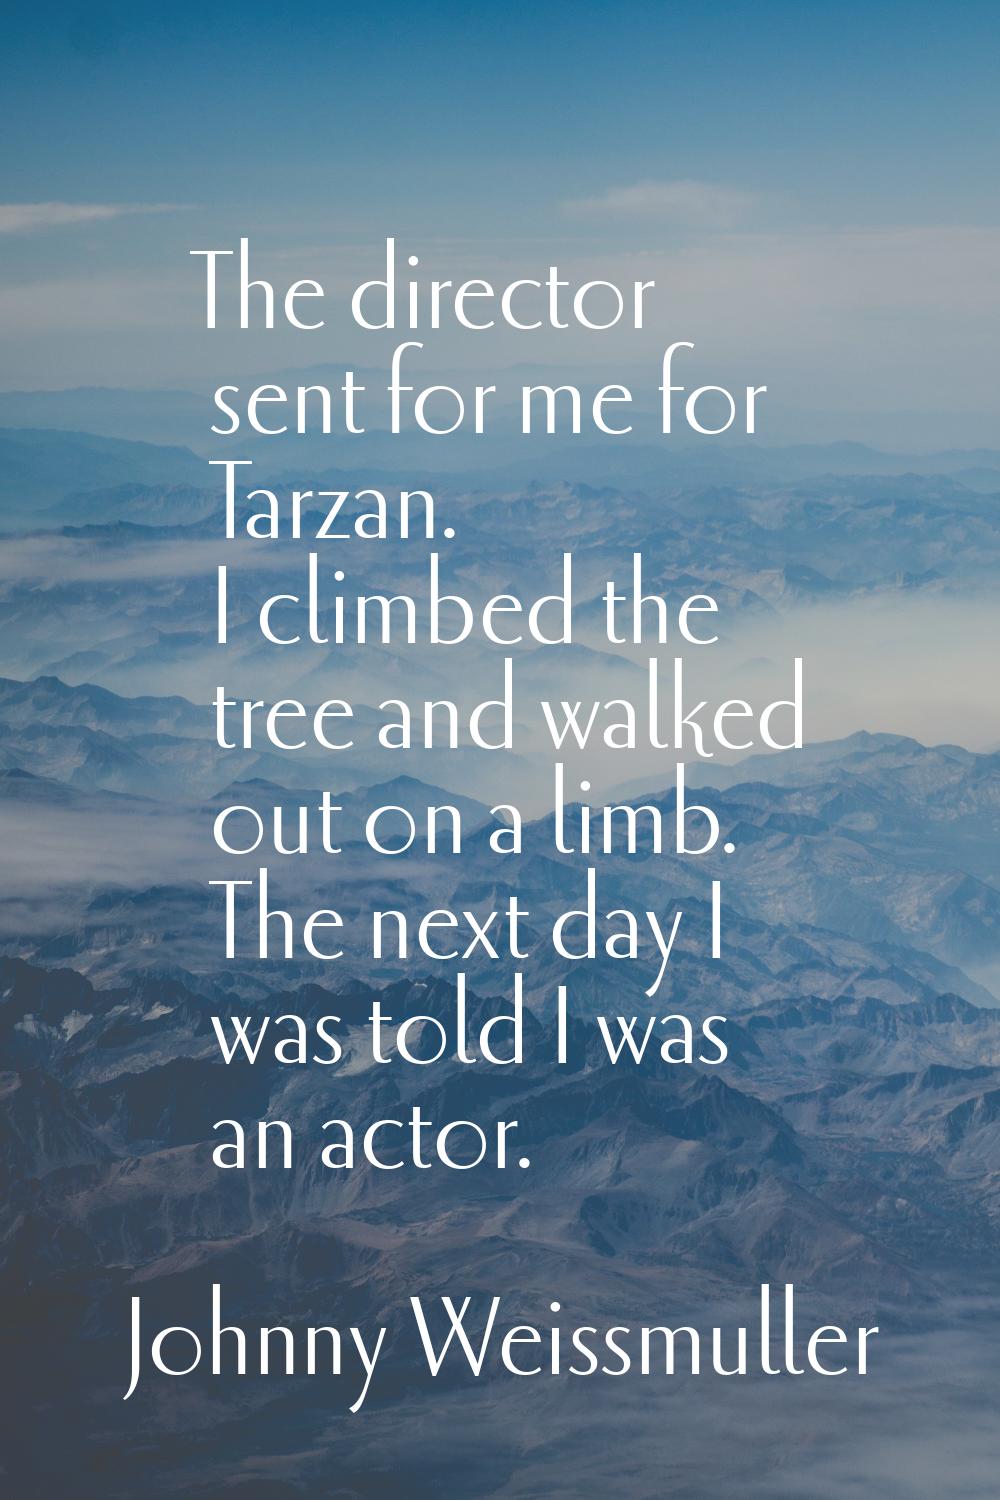 The director sent for me for Tarzan. I climbed the tree and walked out on a limb. The next day I wa